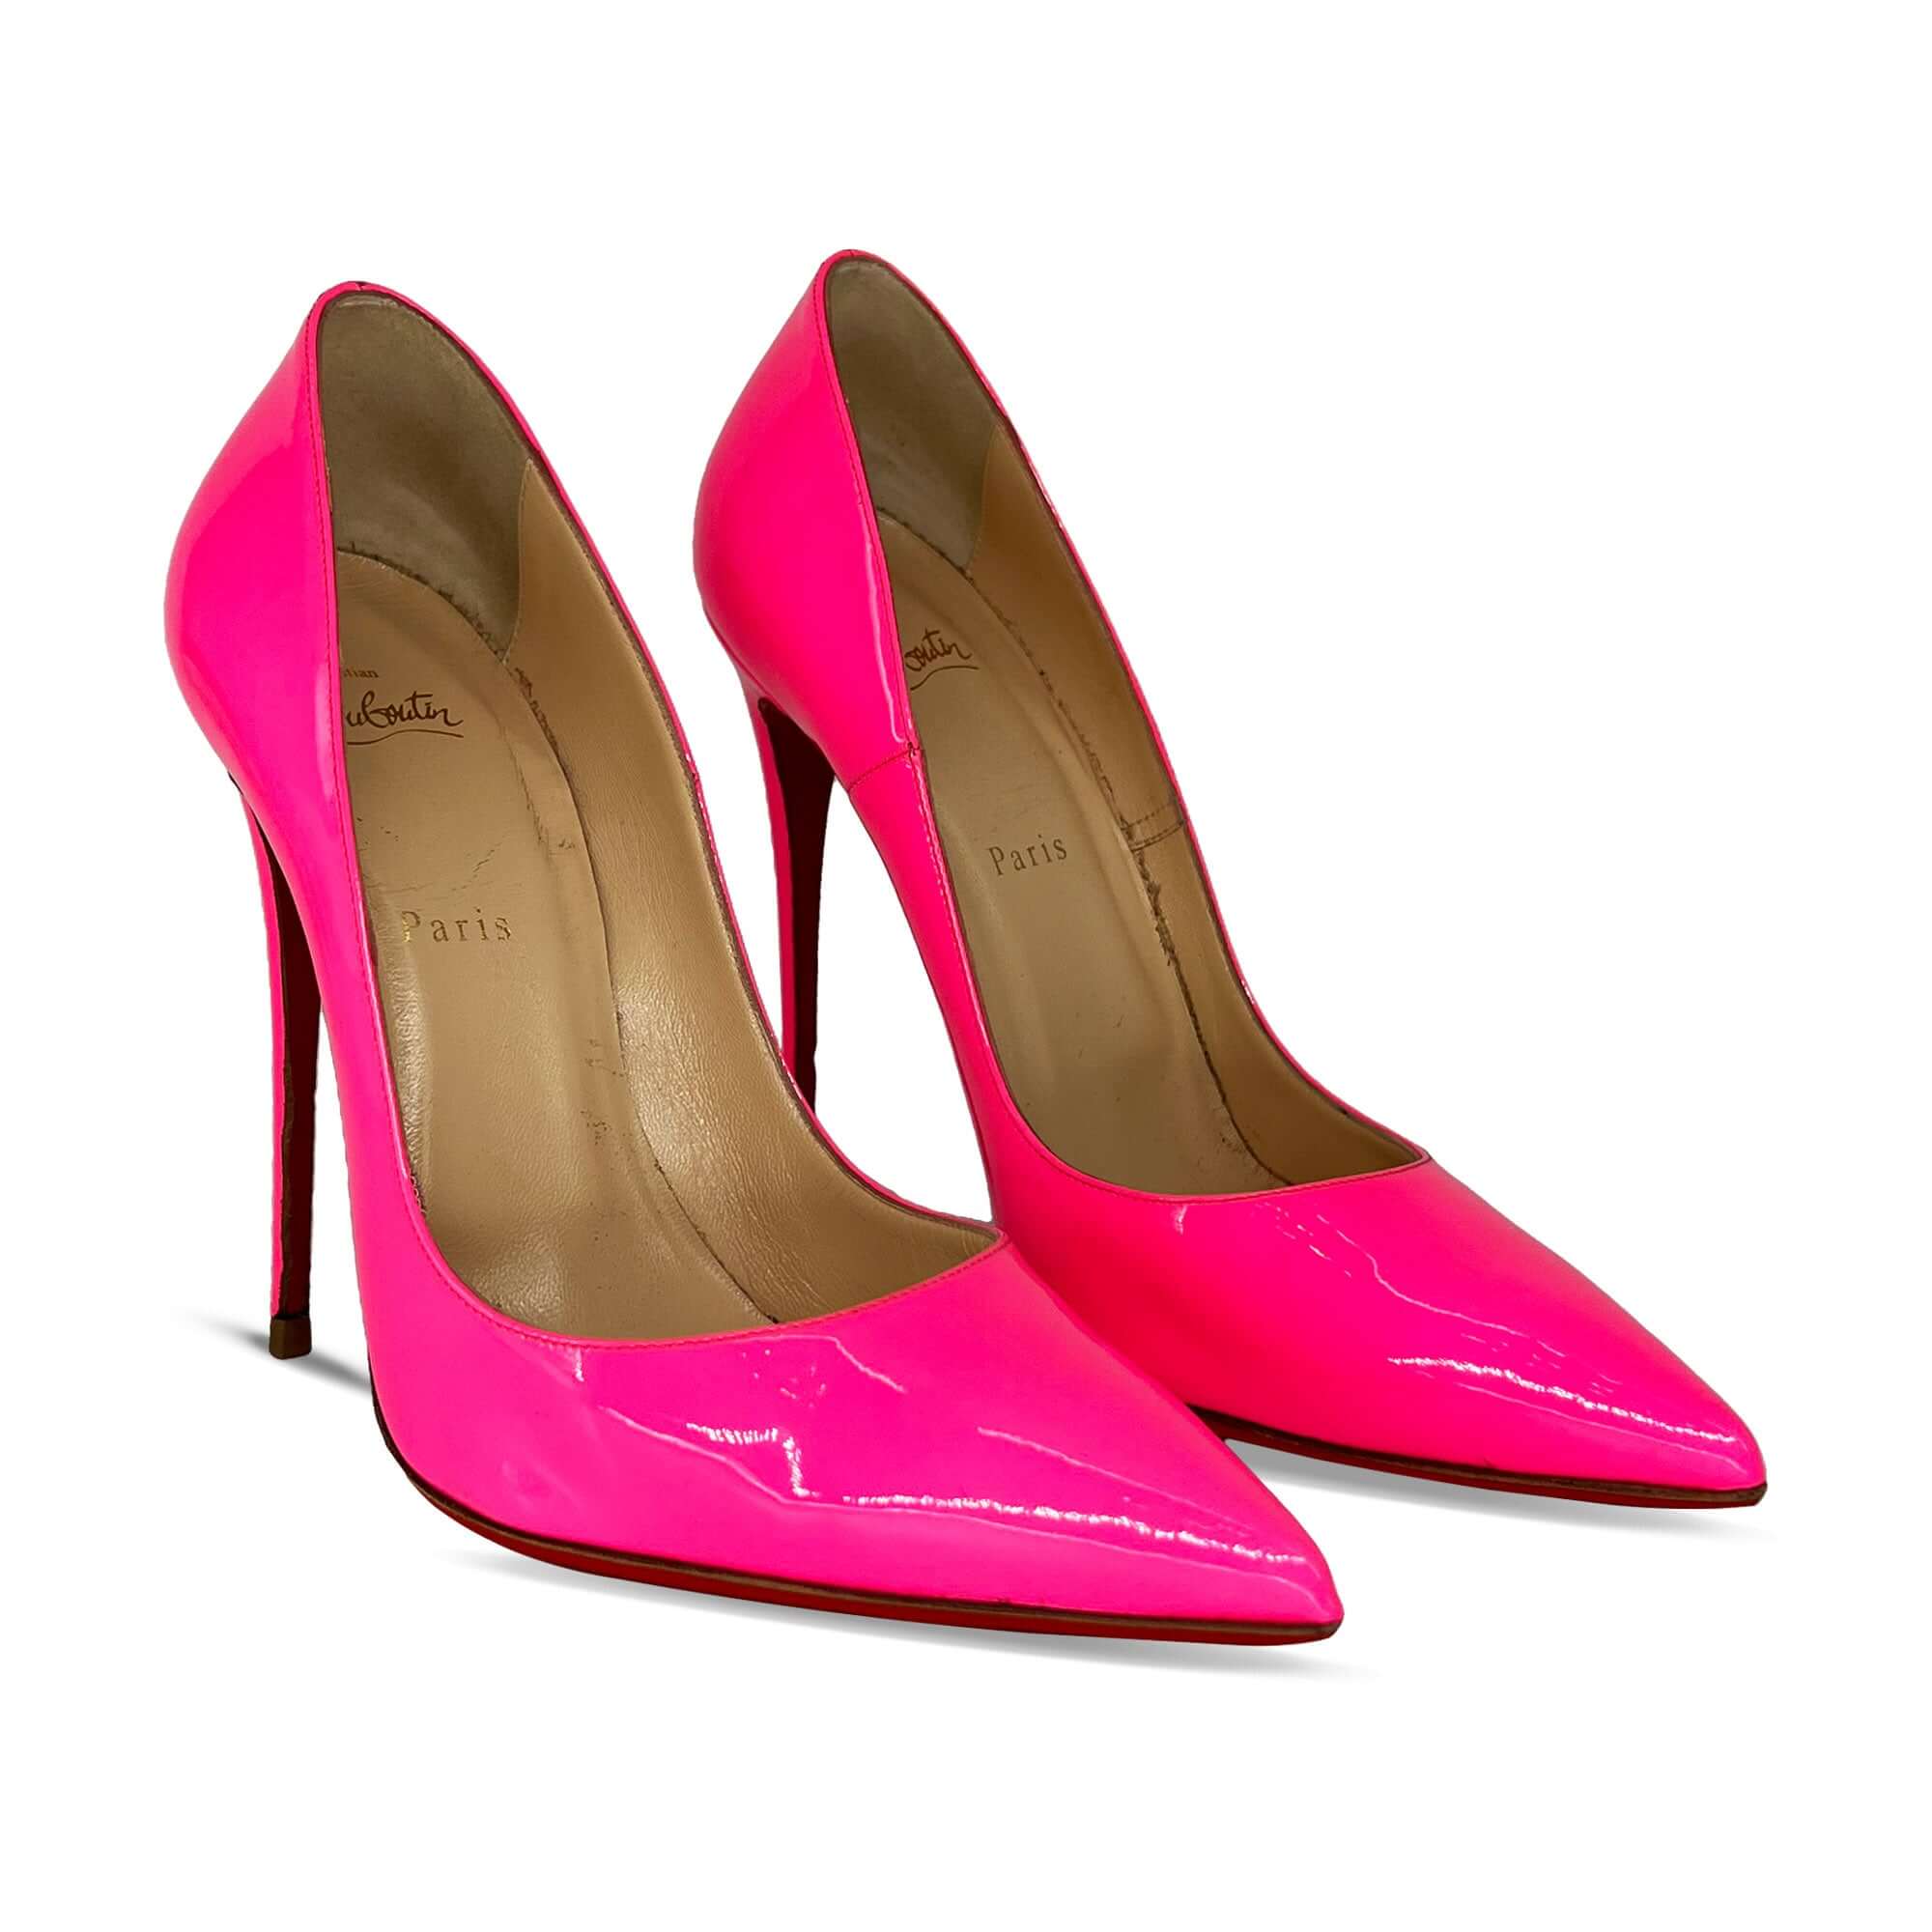 Christian Louboutin pink So Kate leather heels